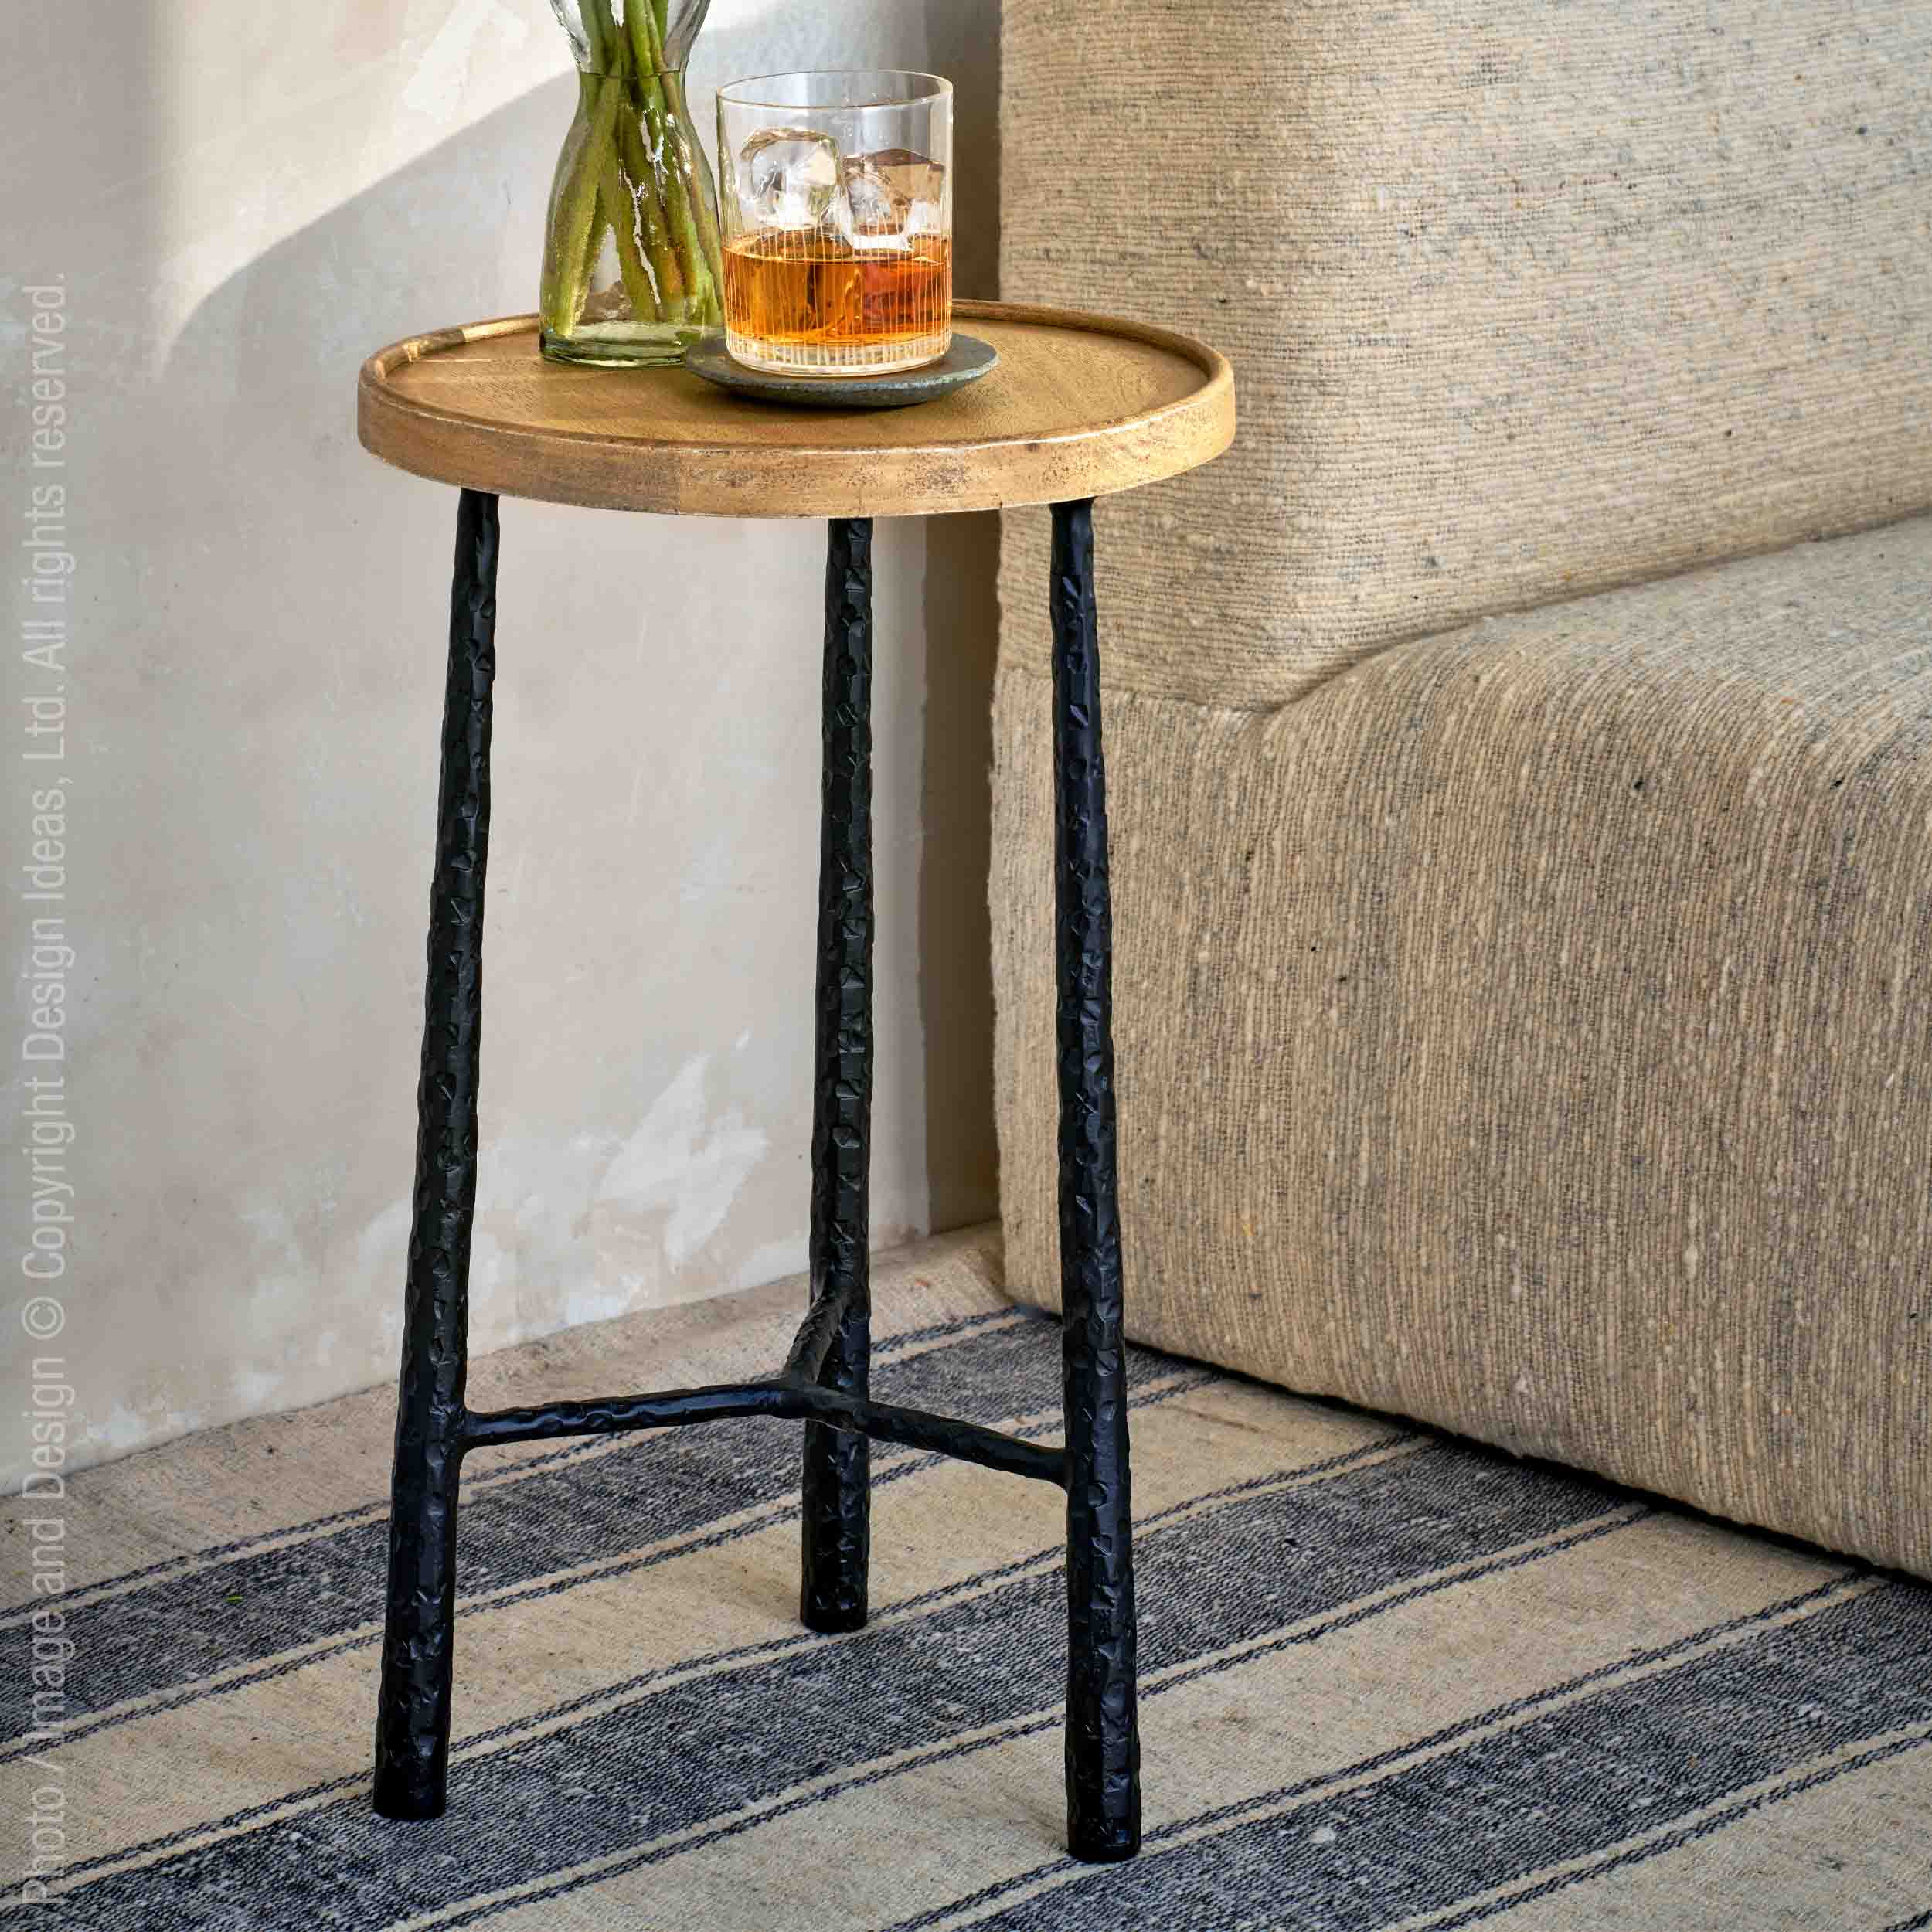 Valea™ round side table - Natural | Image 3 | Premium Table from the Valea collection | made with Mango Wood for long lasting use | texxture